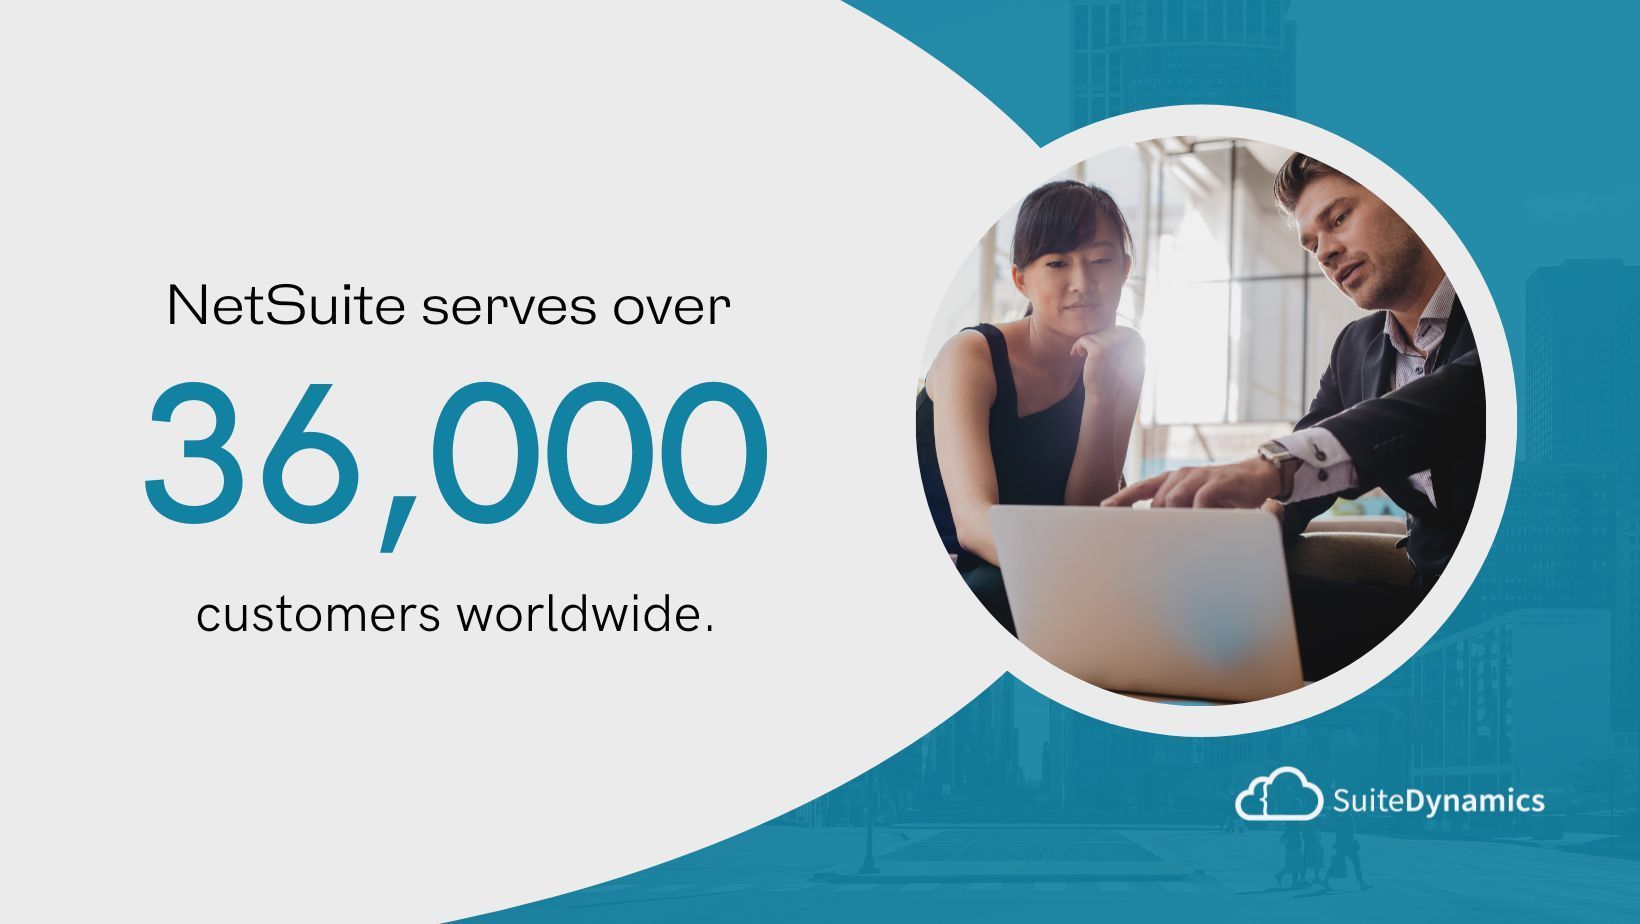 Graphic stating that NetSuite serves over 36,000 customers worldwide.